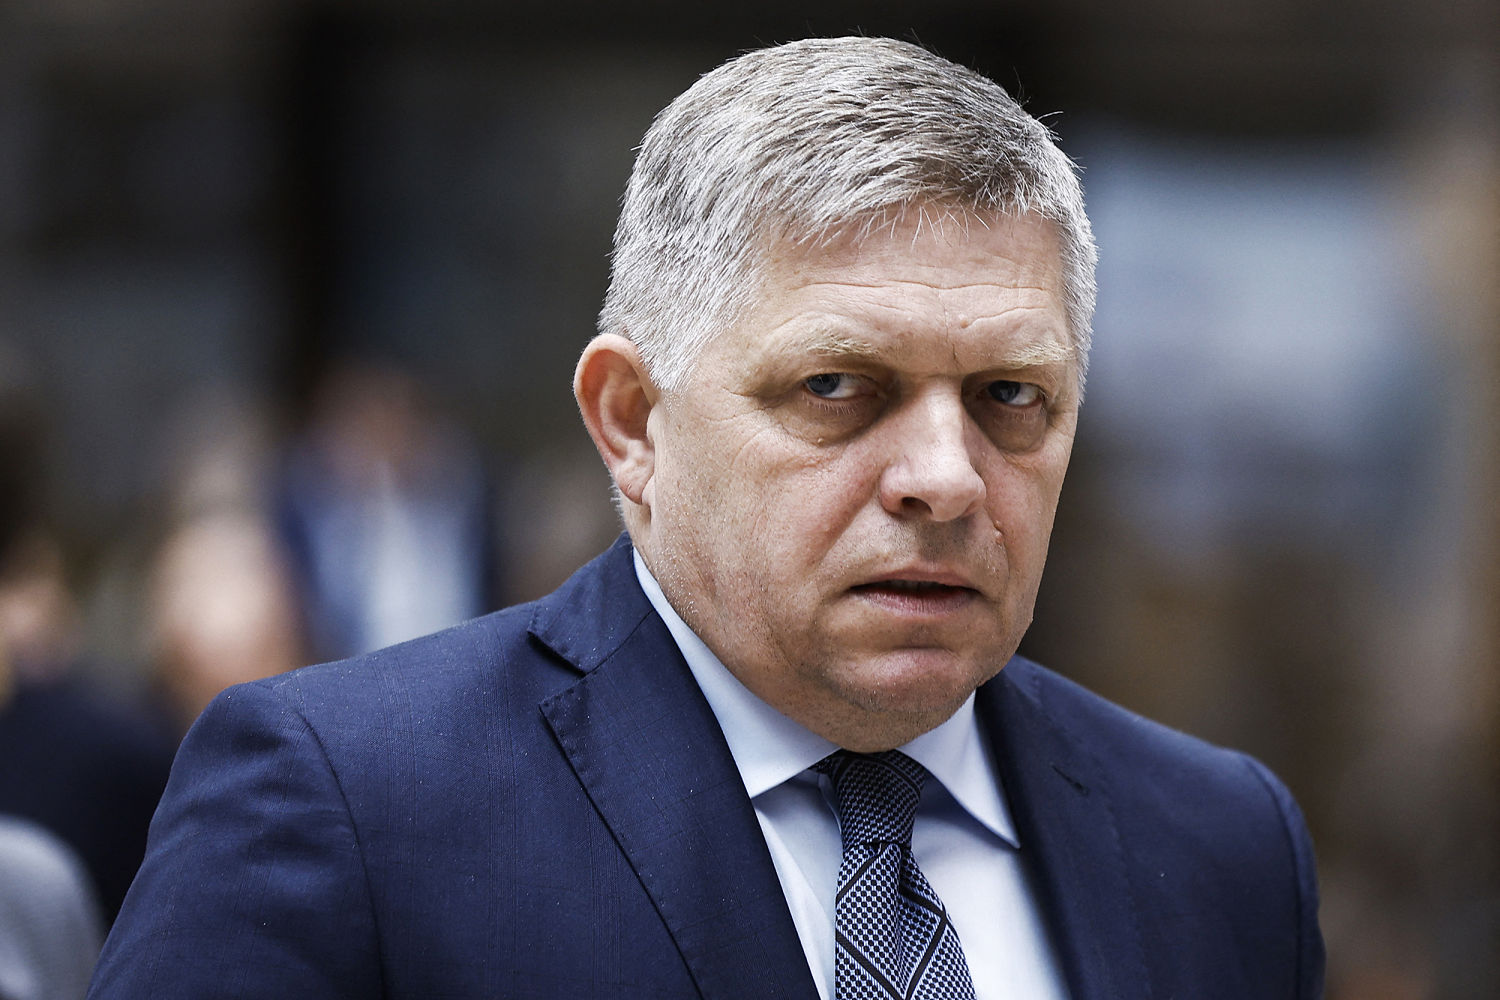 Slovak PM is stable after ‘miracles’ in the hospital as suspect is ordered detained